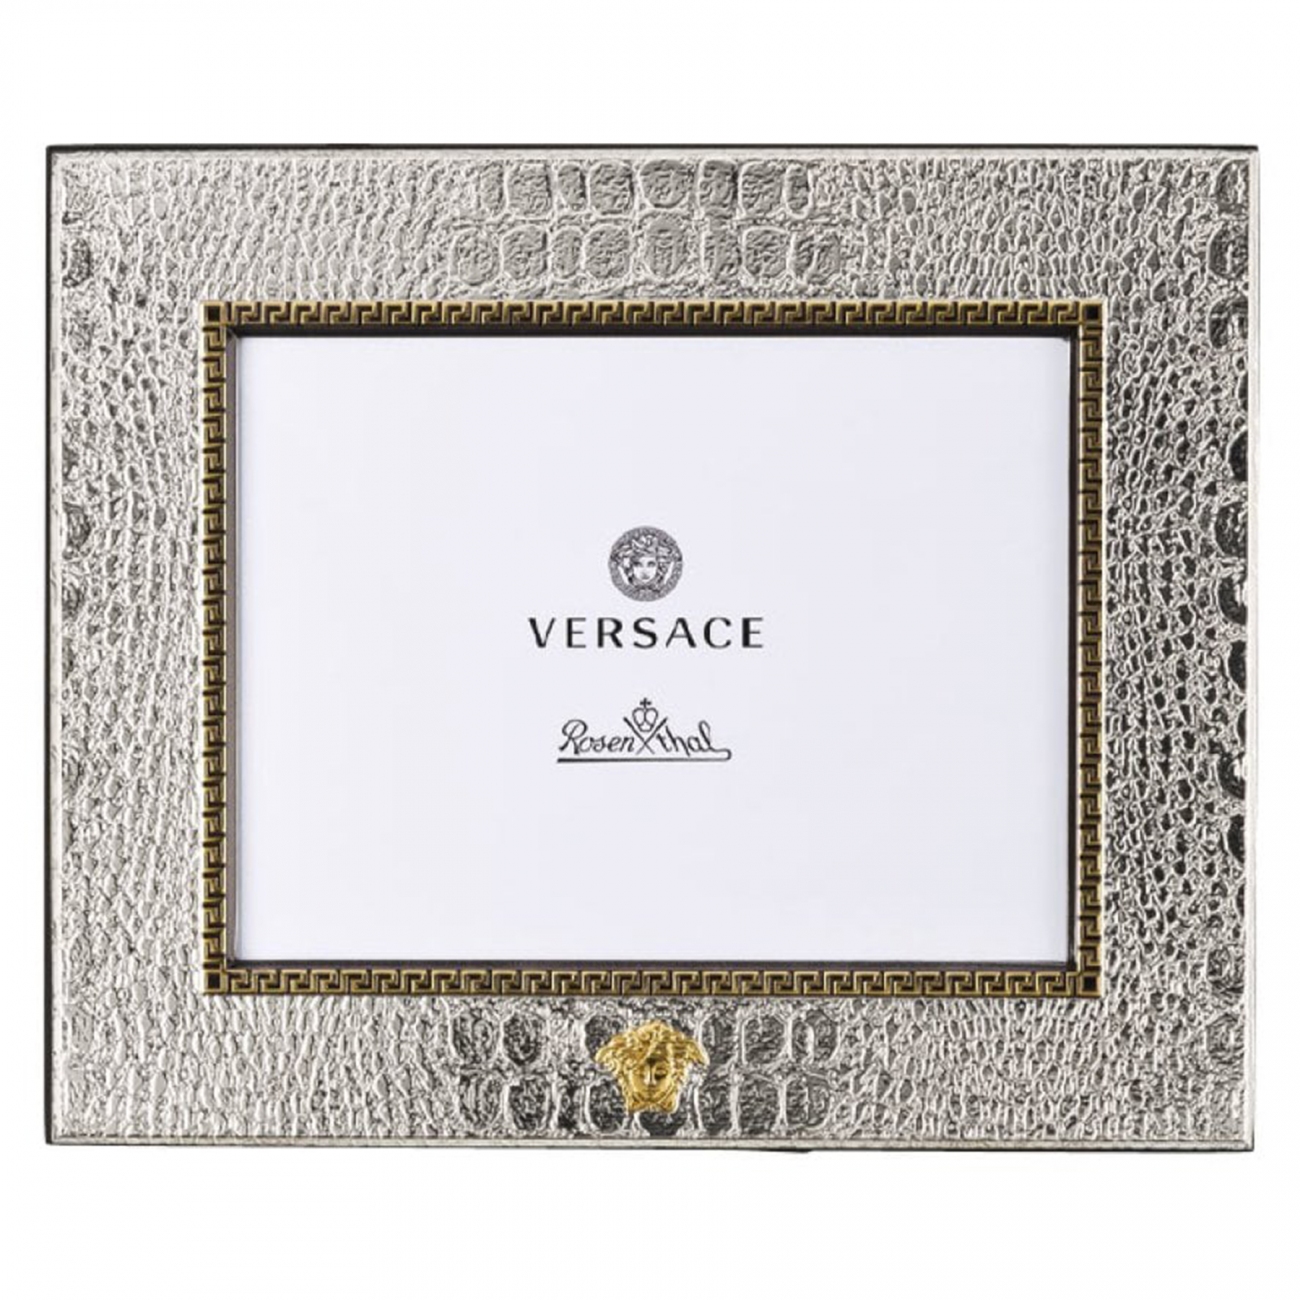 Rosenthal Versace Frames VHF3 Silver Picture frame